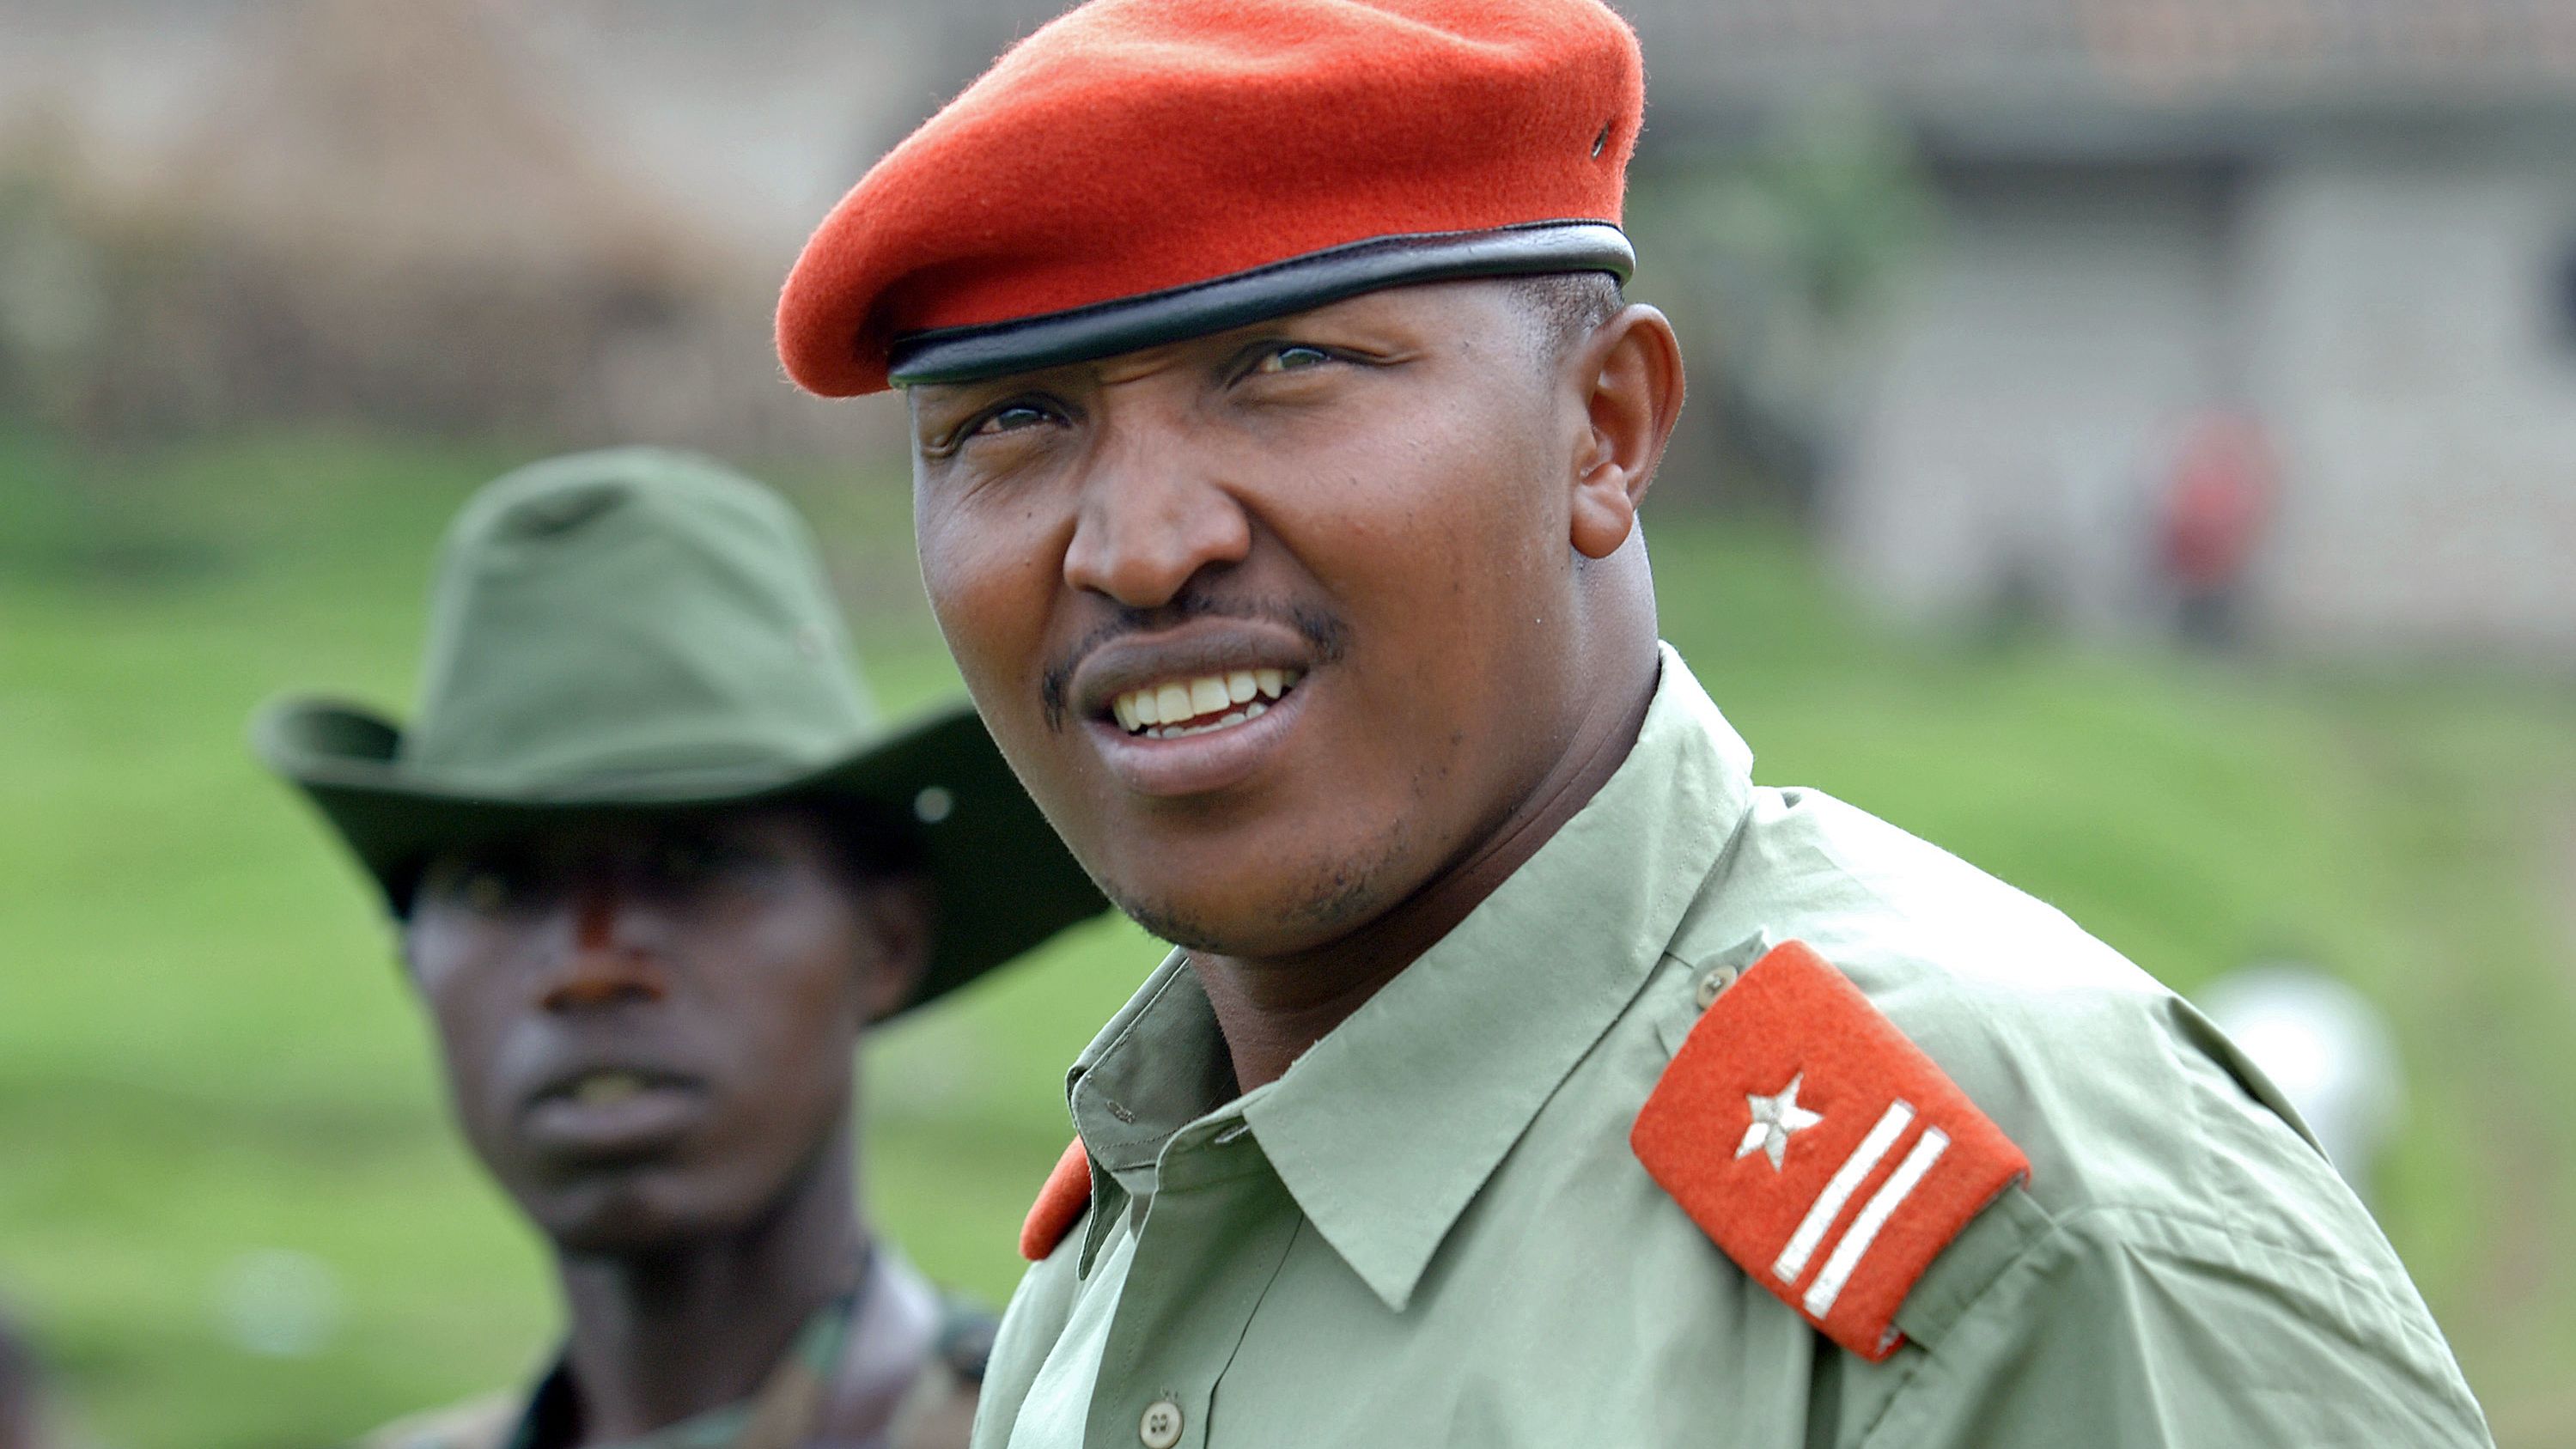 Congolese warlord Bosco Ntaganda will likely face prosecution by the International Criminal Court.